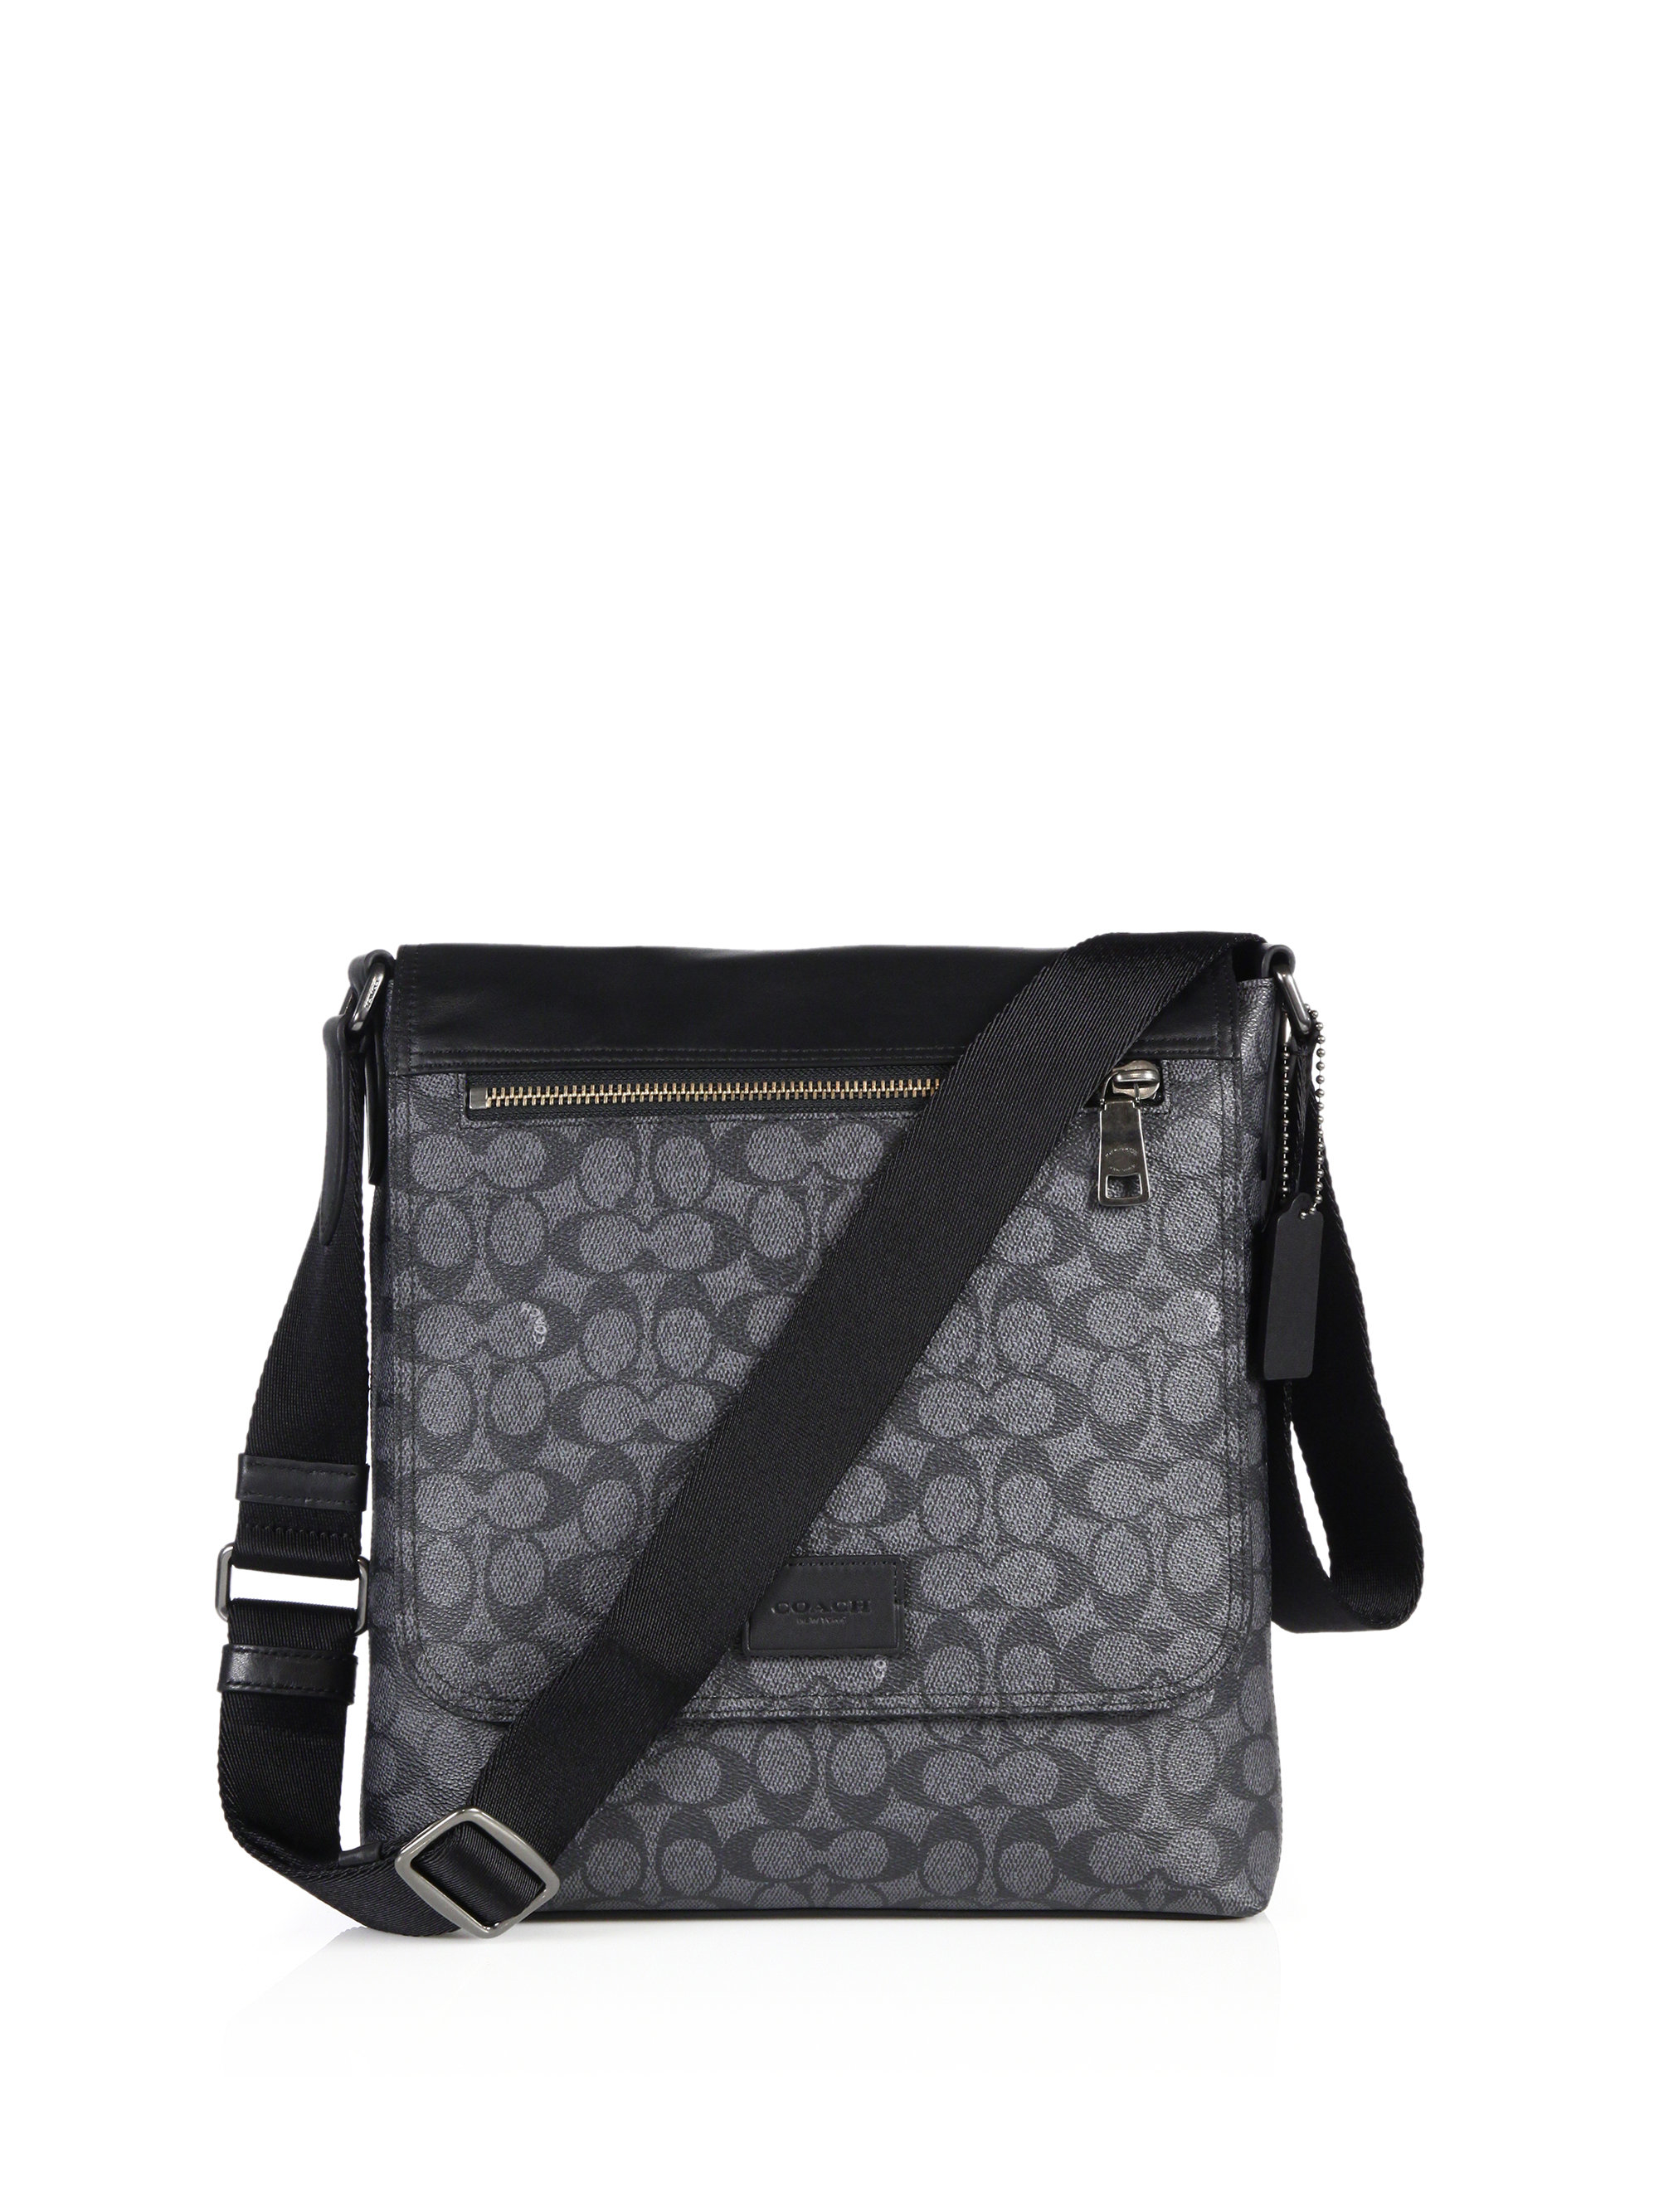 Lyst - COACH Sam Leather-trimmed Coated Canvas Crossbody Bag in Black ...